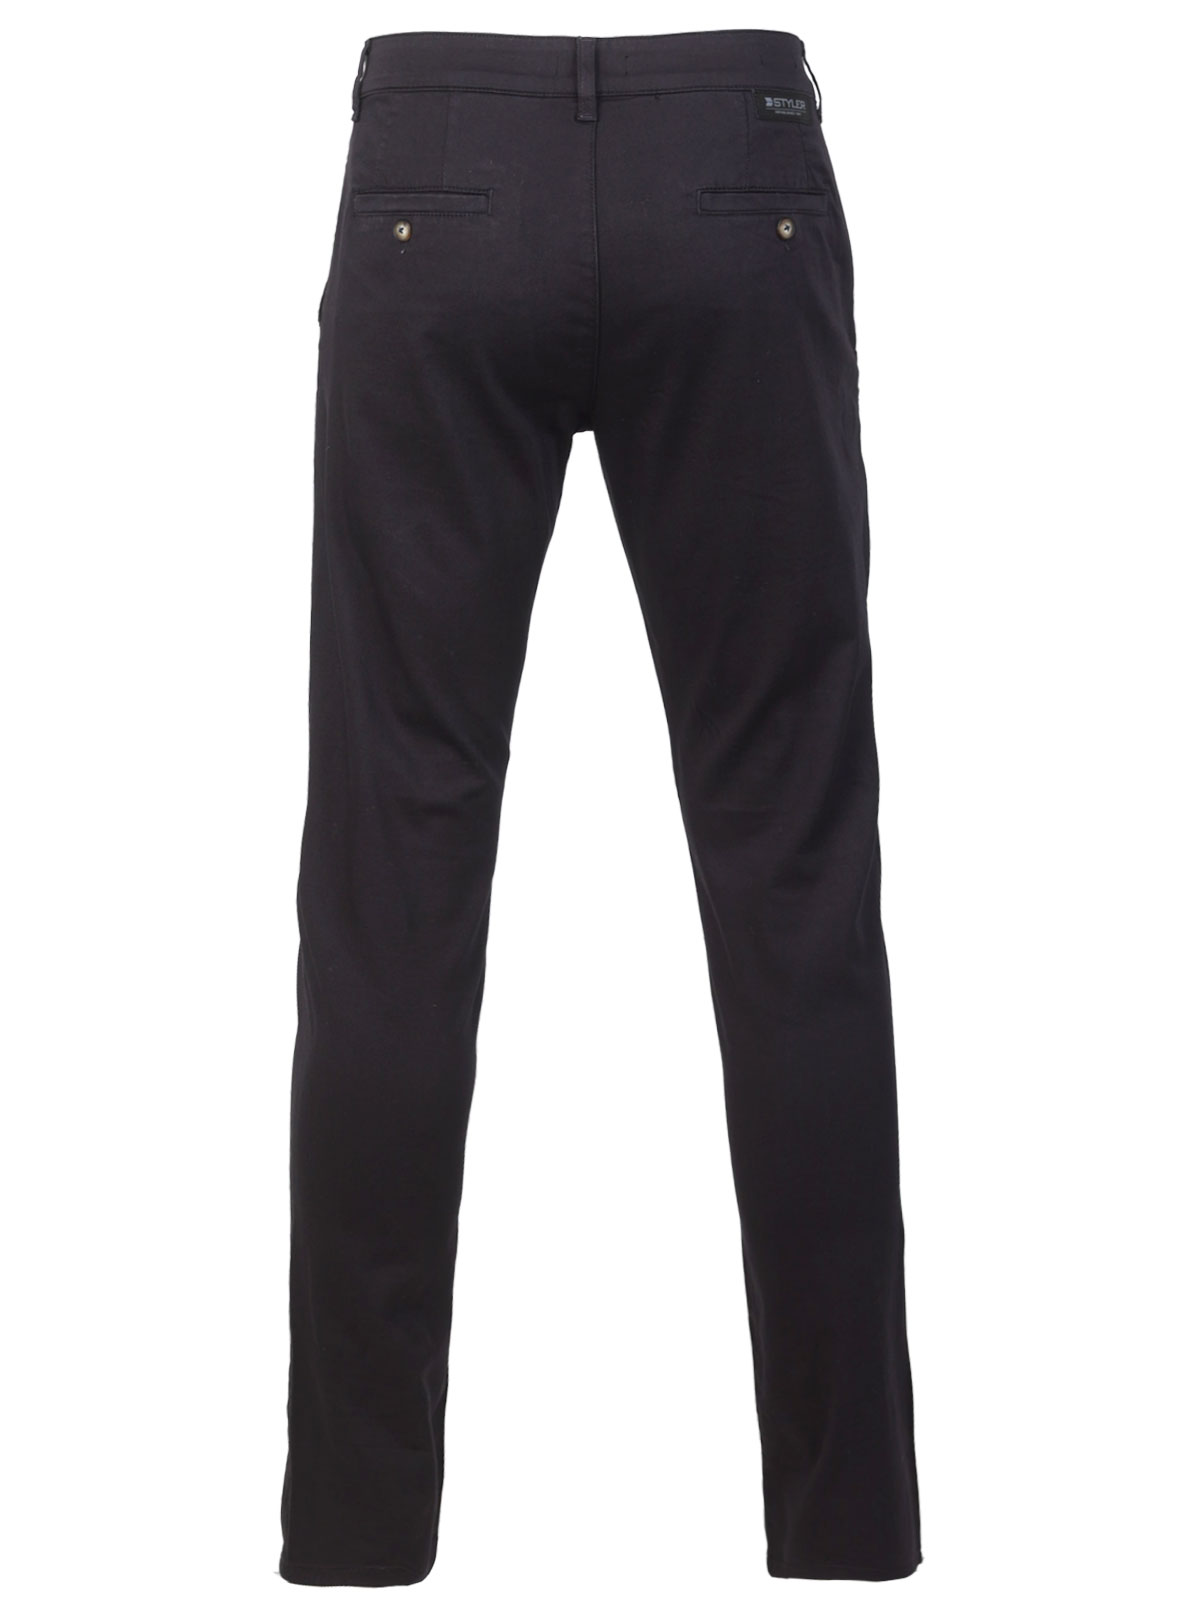 Mens fitted trousers in dark blue - 60307 € 66.93 img2